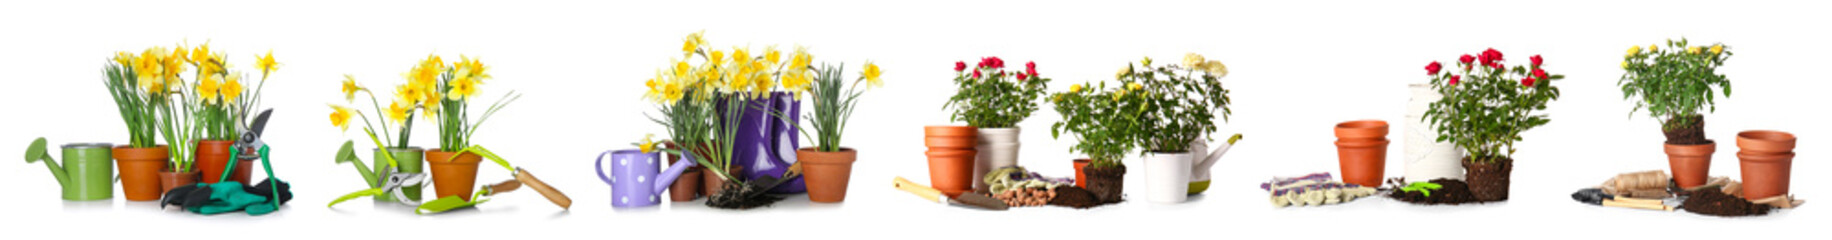 Set of gardening tools and blooming plants on white background